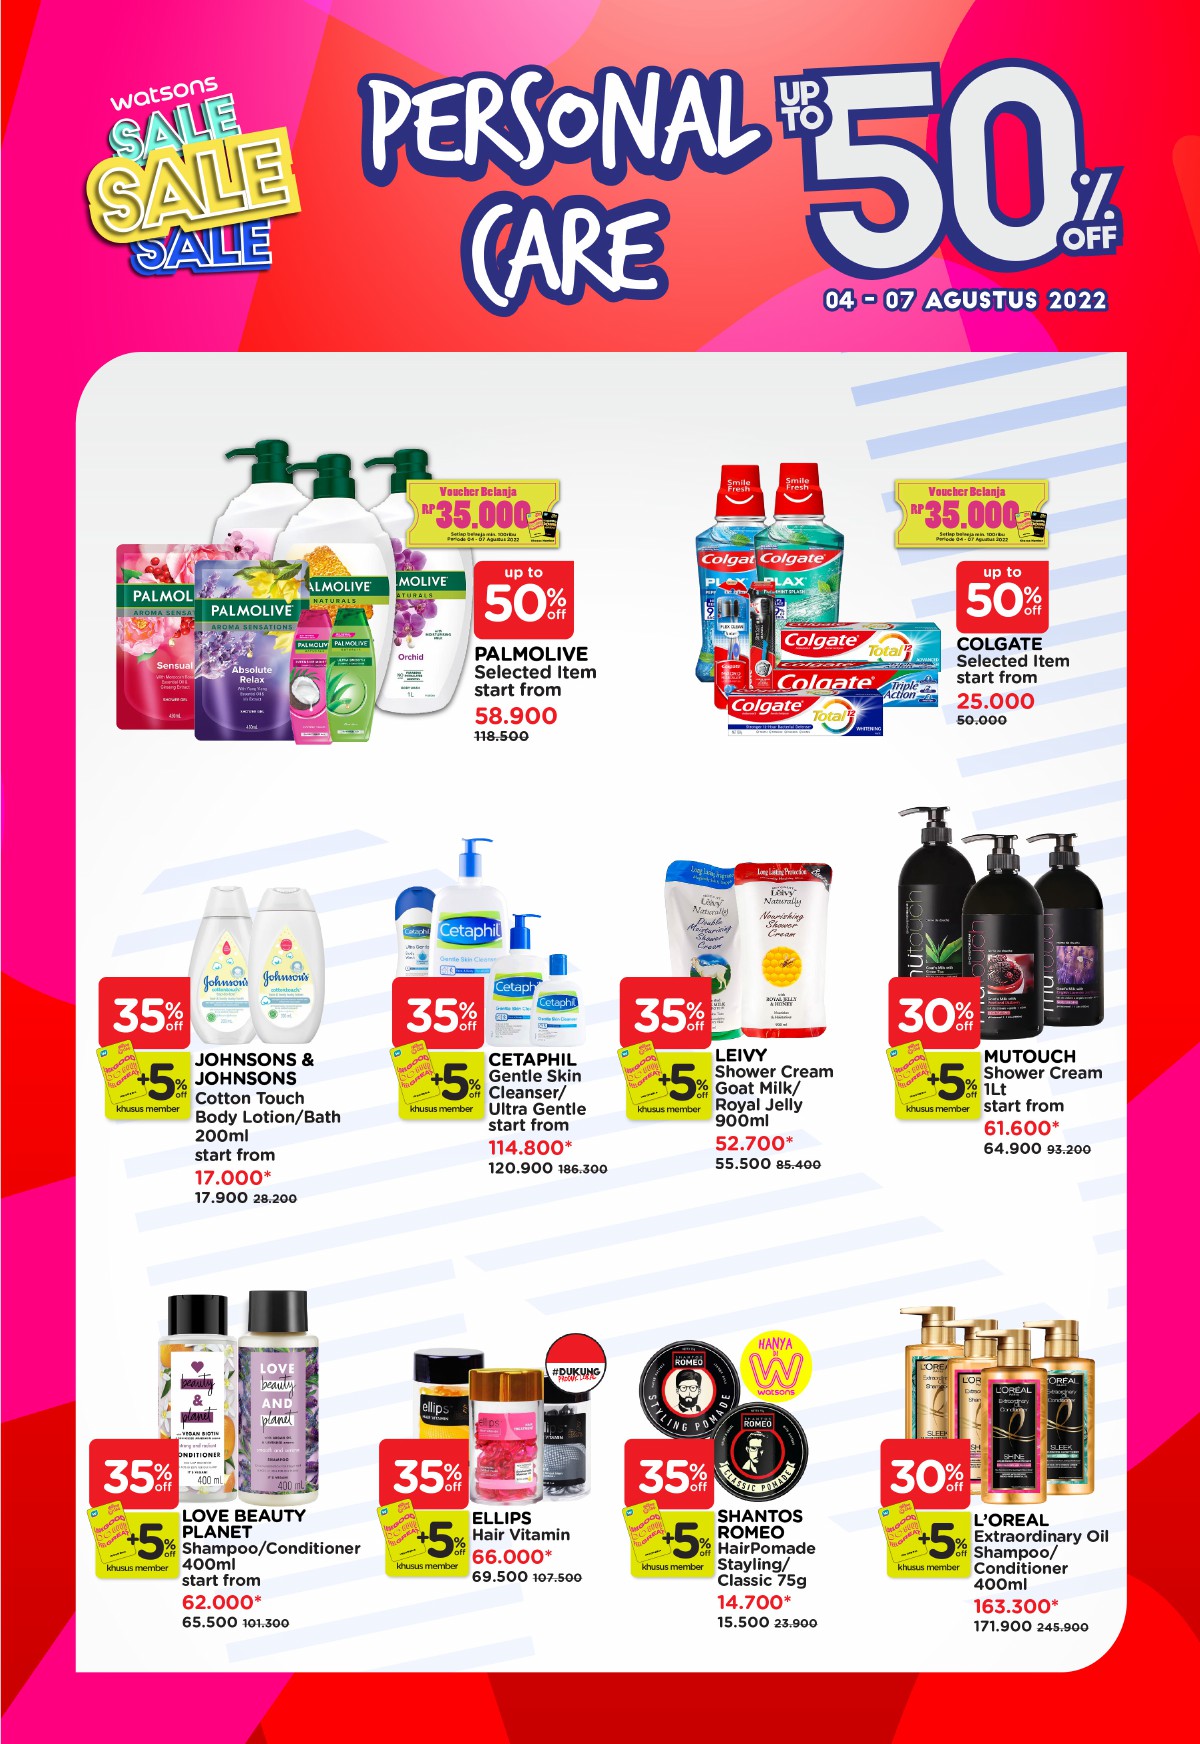 Promo WATSONS WEEKEND SUPER SPESIAL SALE up to 55% off - periode 04-07 Agustus 2022